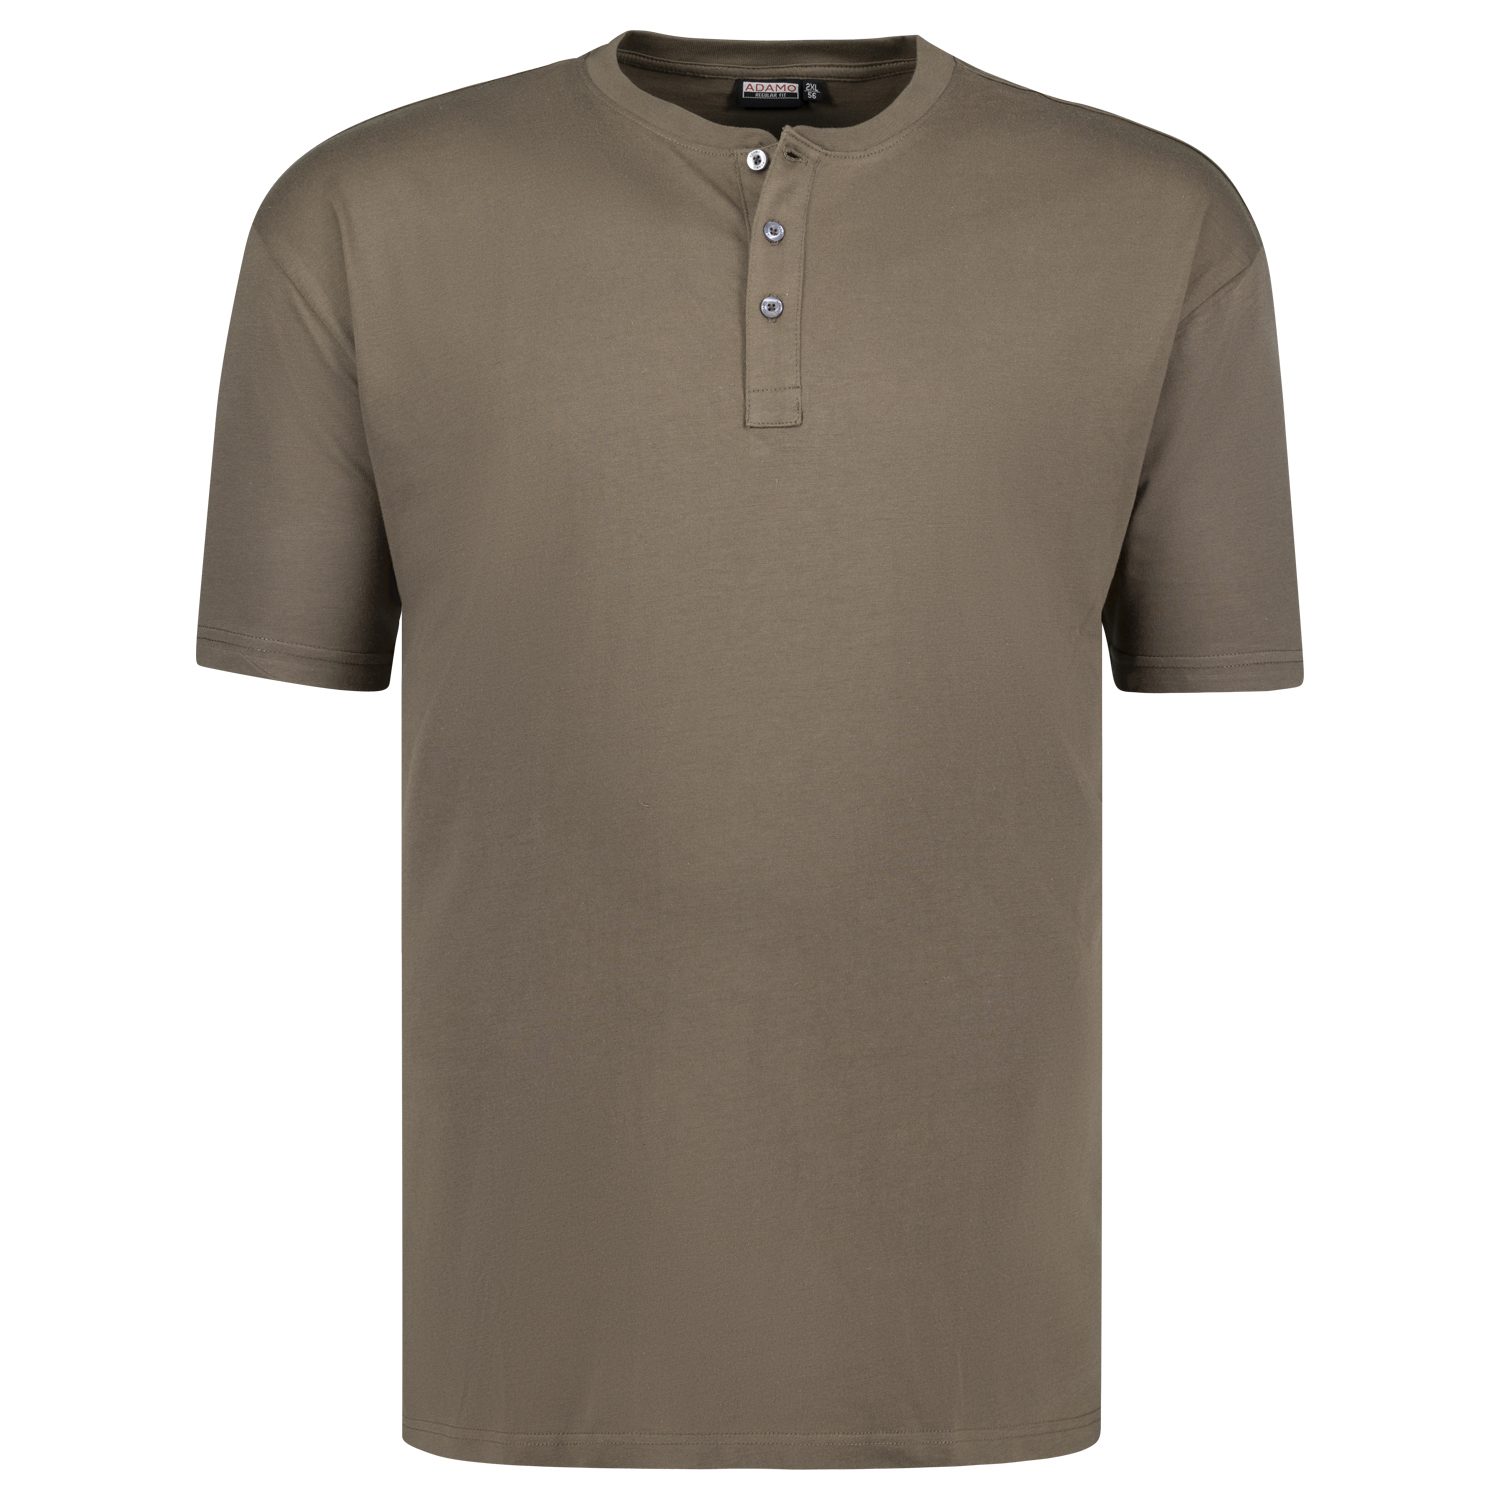 T-shirt in khaki series Silas regular fit by Adamo for men up to oversize 10XL